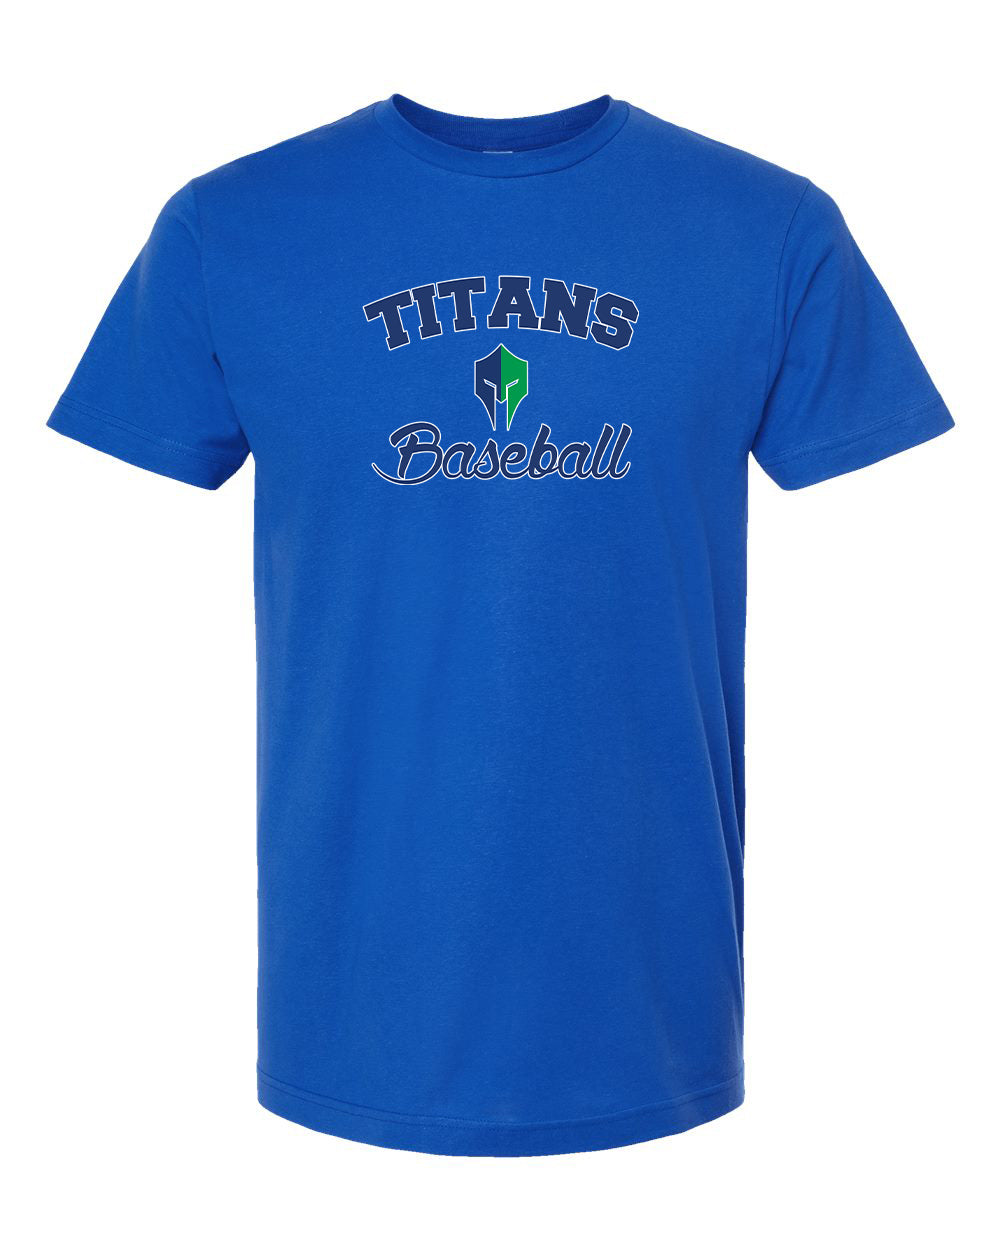 Titans Adult Tee "CTB" - 202 (color options available)